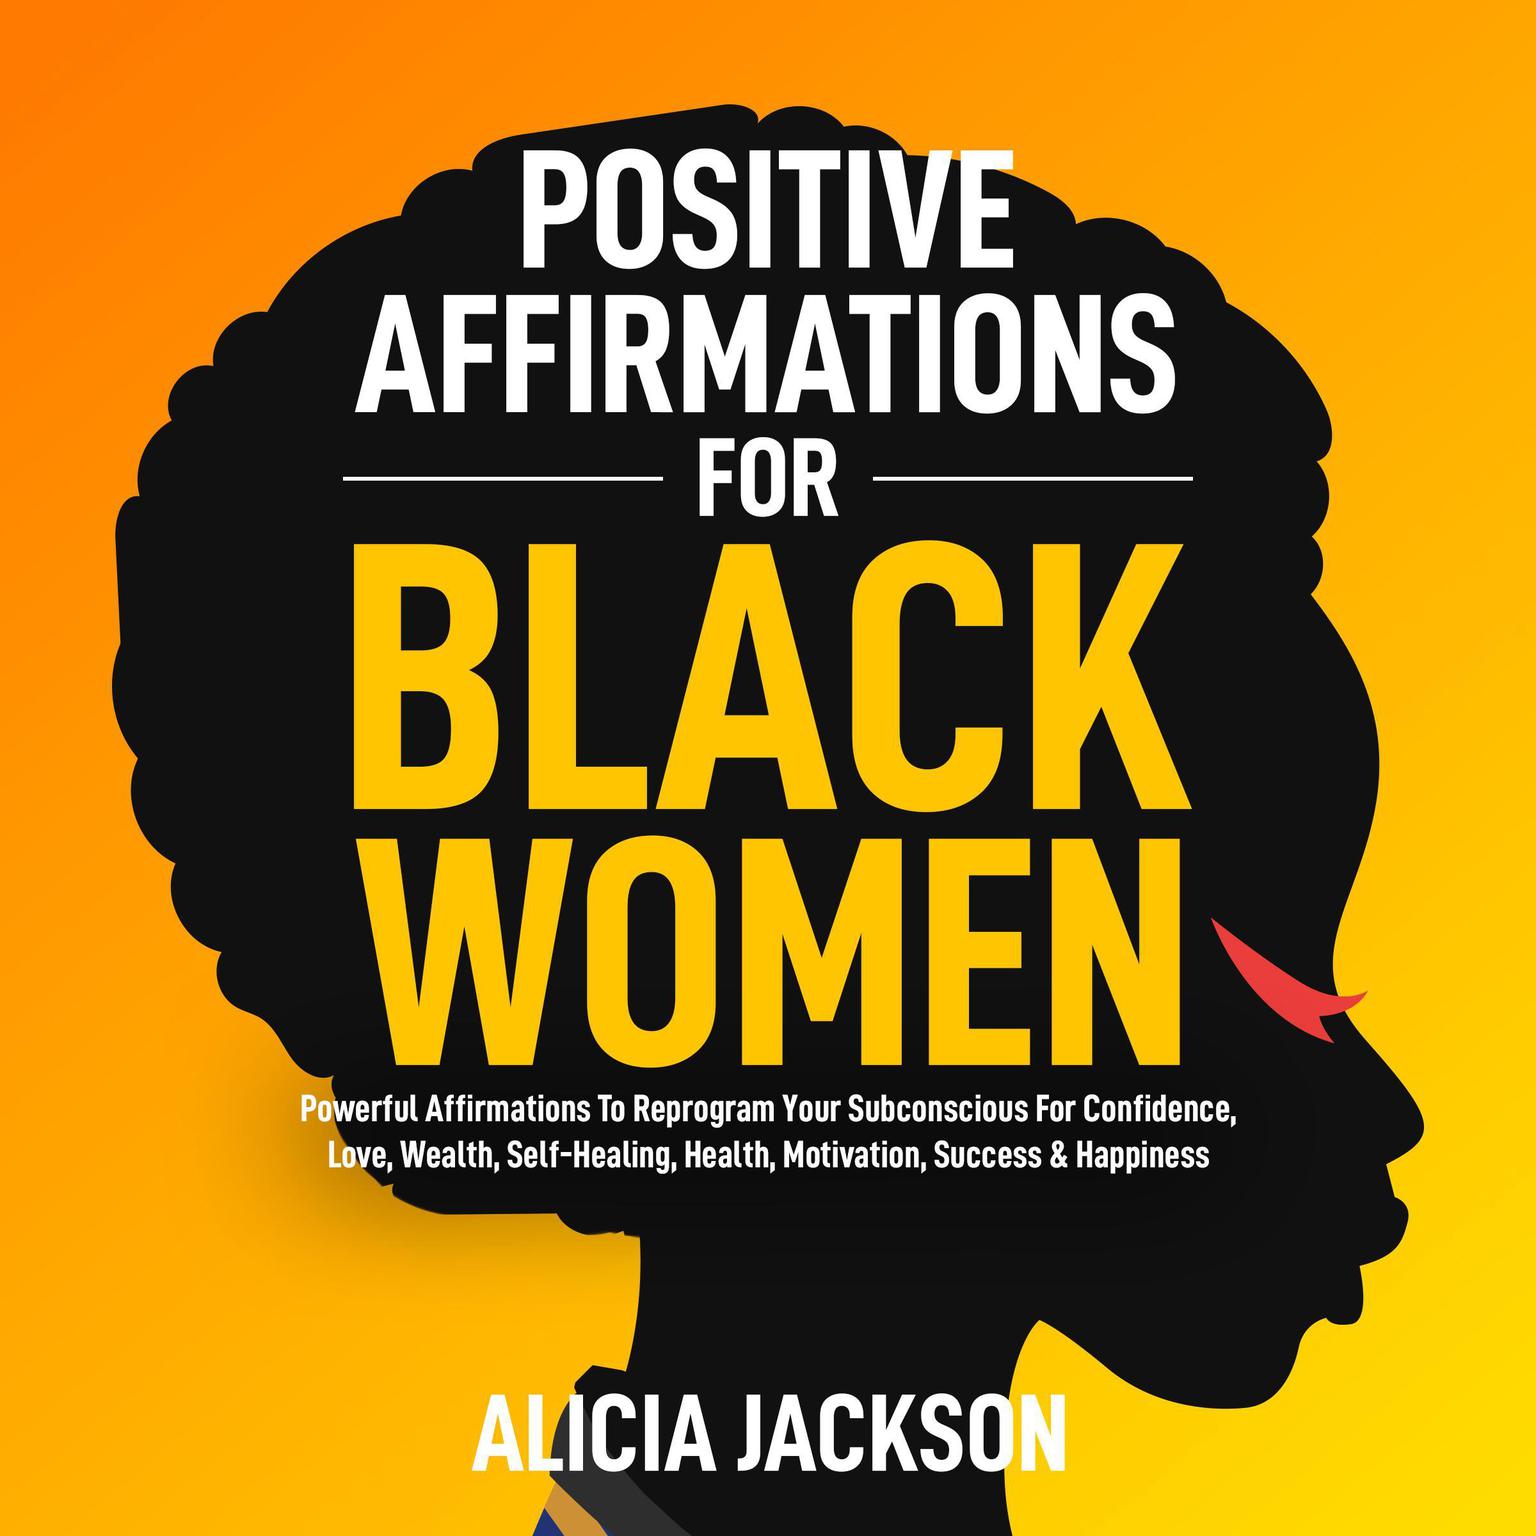 Positive Affirmations For Black Women: POWERFUL AFFIRMATIONS TO REPROGRAM YOUR SUBCONSCIOUS FOR CONFIDENCE, LOVE, WEALTH, SELF-HEALING, HEALTH, MOTIVATION,  SUCCESS & HAPPINESS Audiobook, by Alicia Jackson